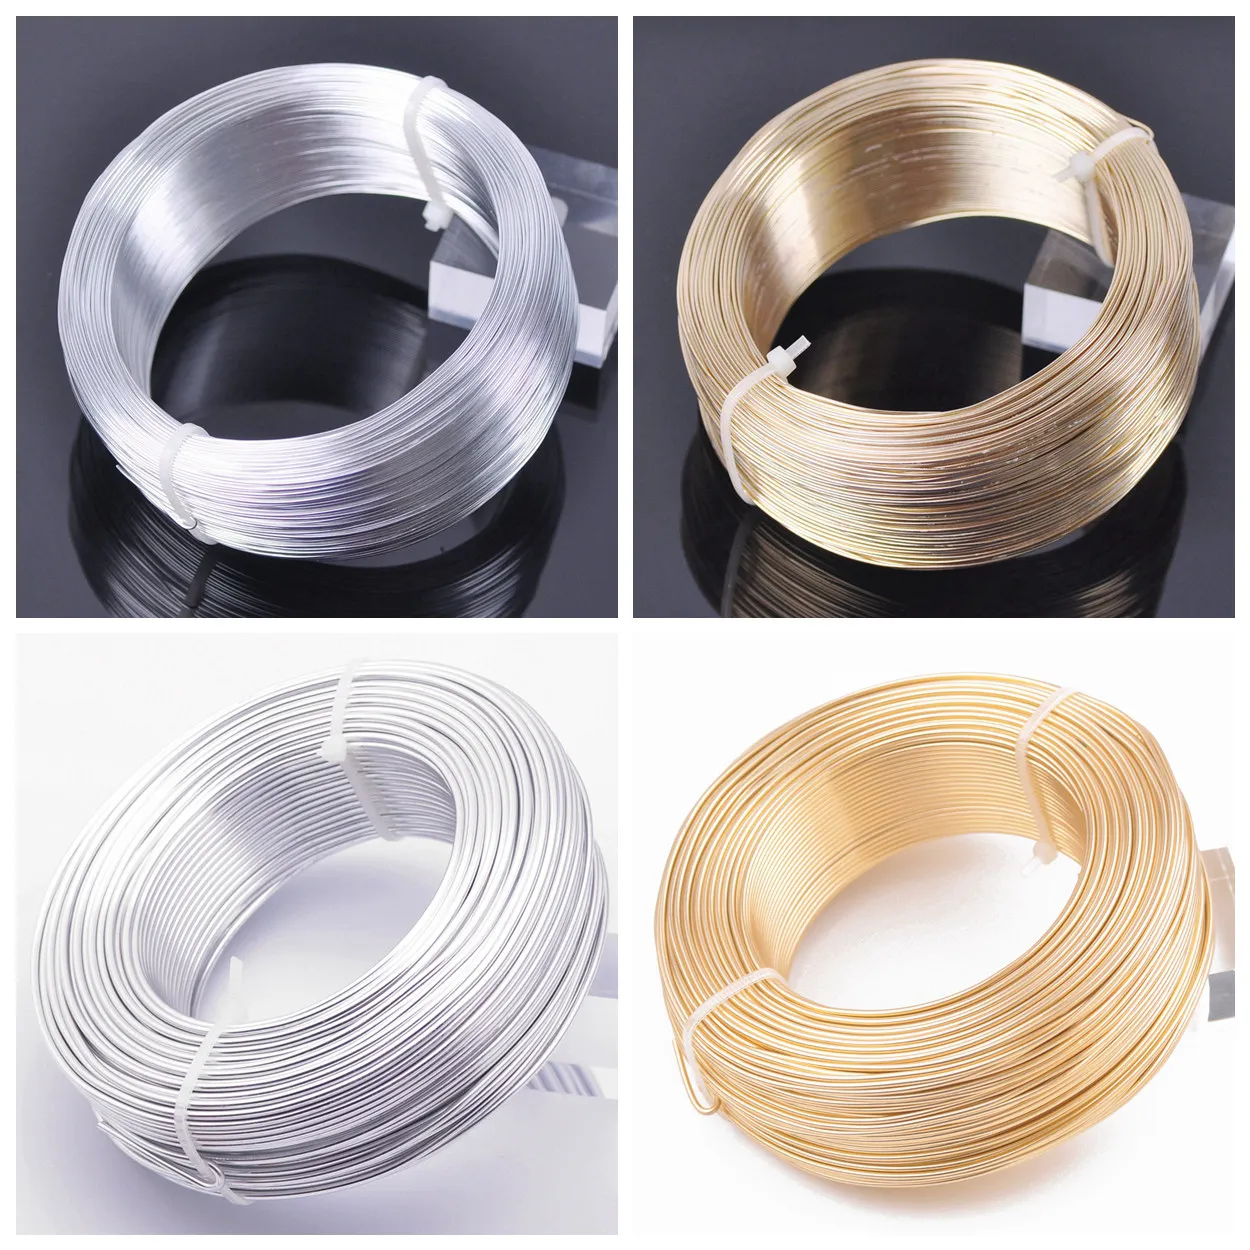 1 Large Roll 0.6mm 0.7mm 0.8mm 1mm 1.5mm 2mm 2.5mm 3mm Aluminium Soft Metal Beading Wire for Jewelry Making DIY Crafts